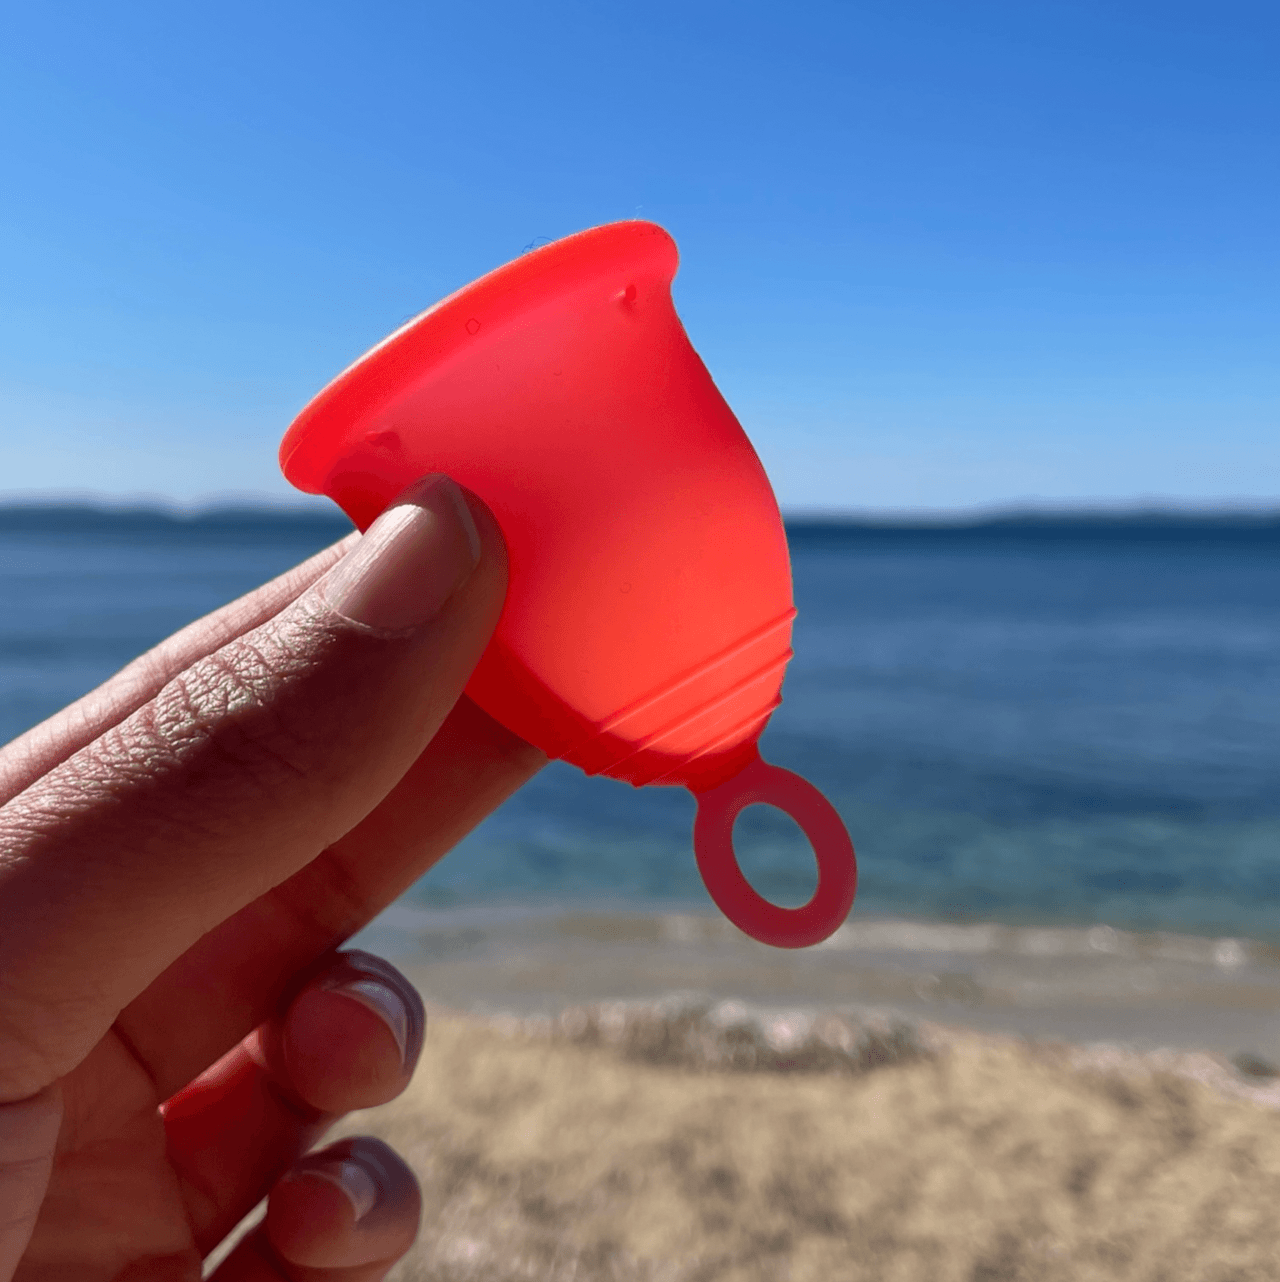 These Women Designed A Menstrual Cup Applicator (Finally)